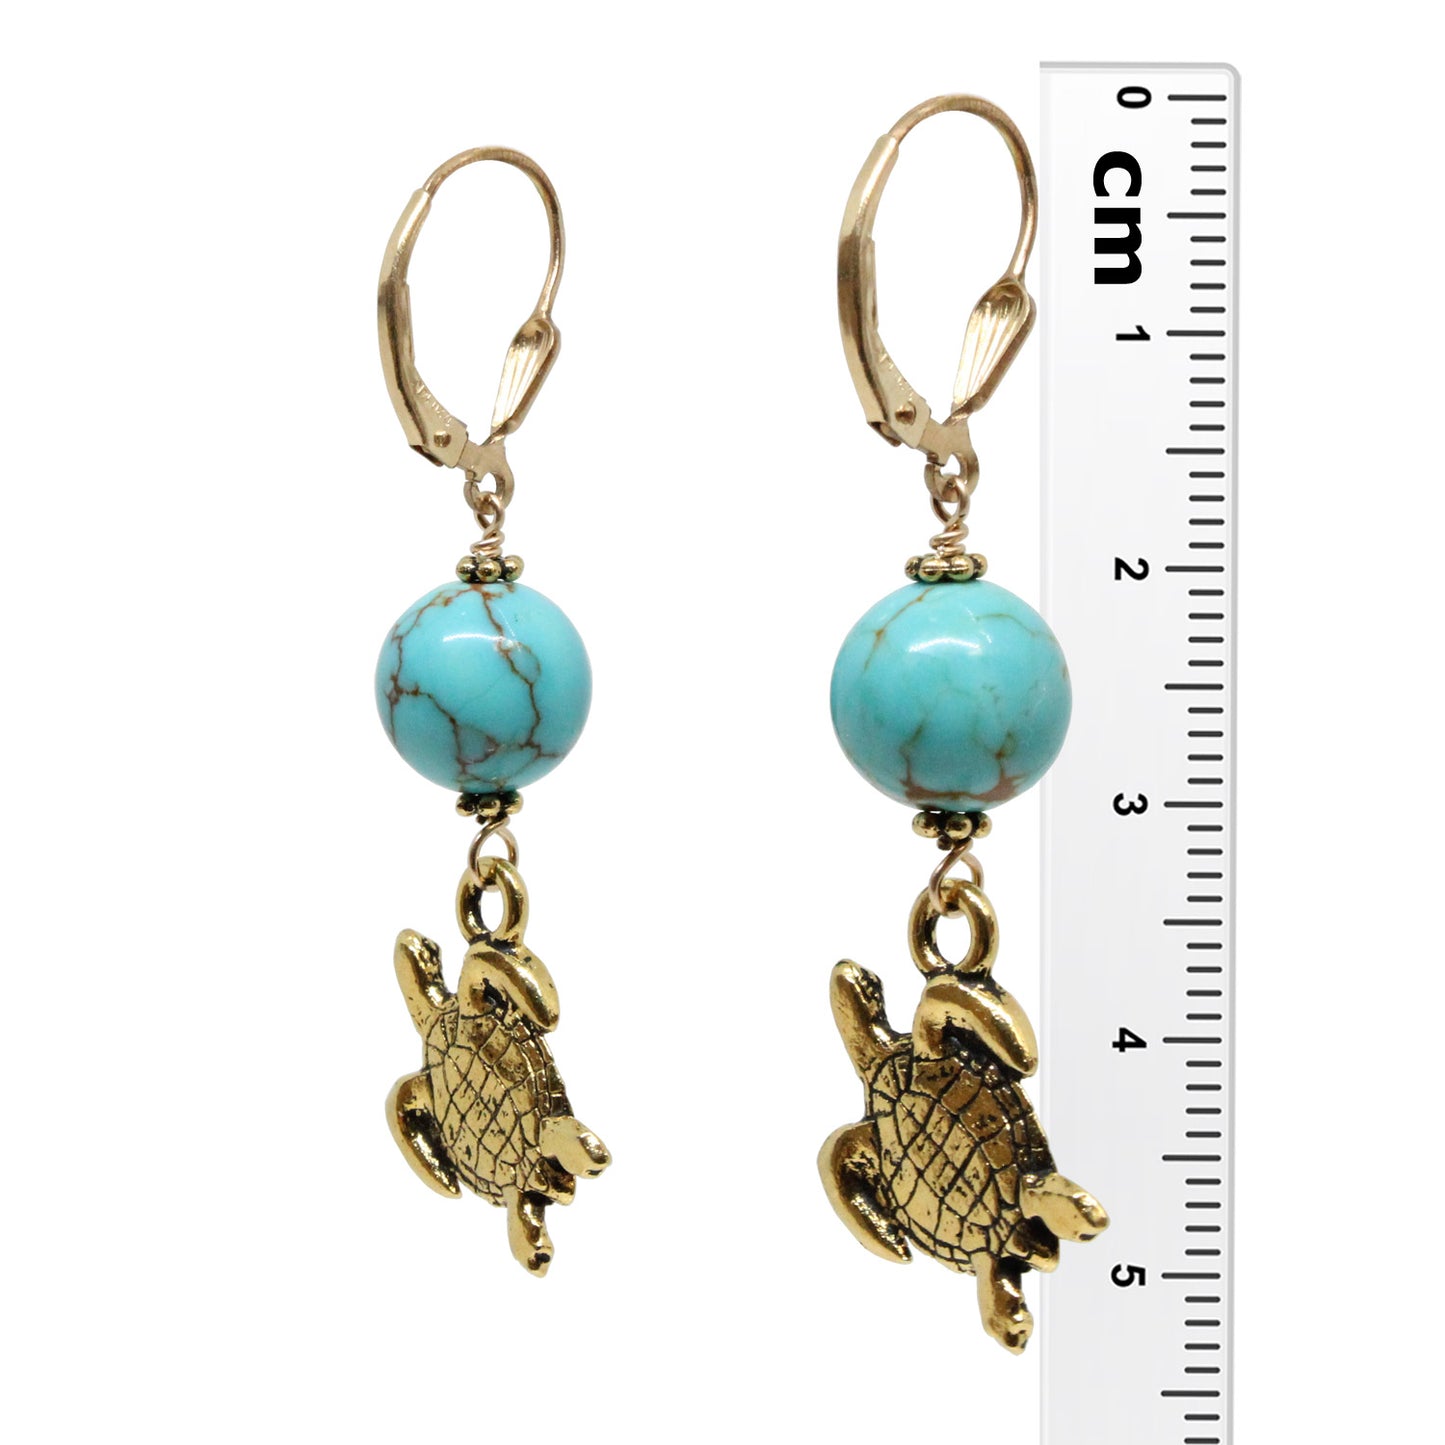 Turquoise Island Sea Turtle Earrings / 53mm length / gold filled shell leverback earwires